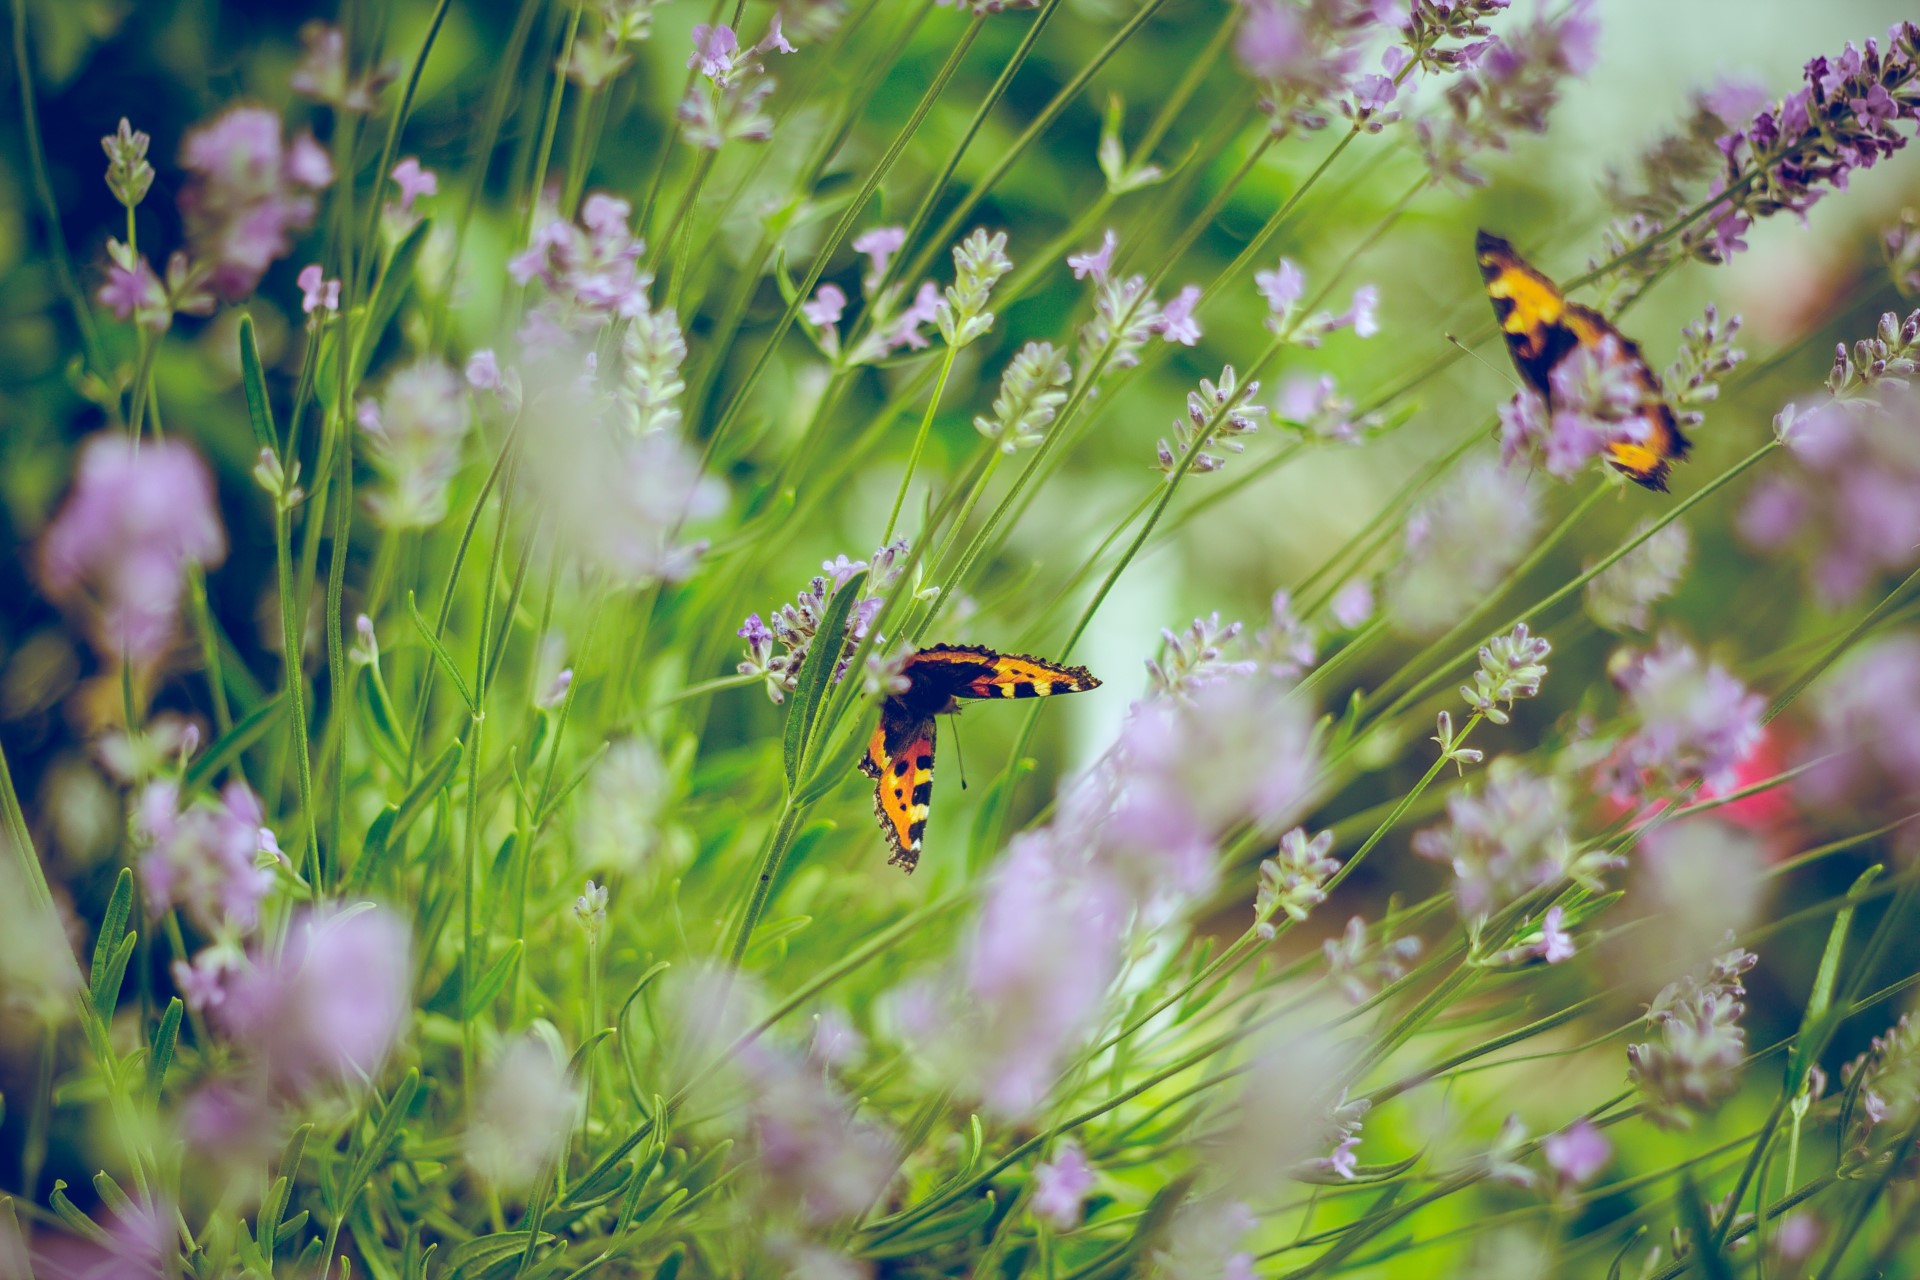 What You Should Know About Gardening for Pollinators | Pollinators rely on us to steward their habitats, so it’s time we turn our attention to helping them.